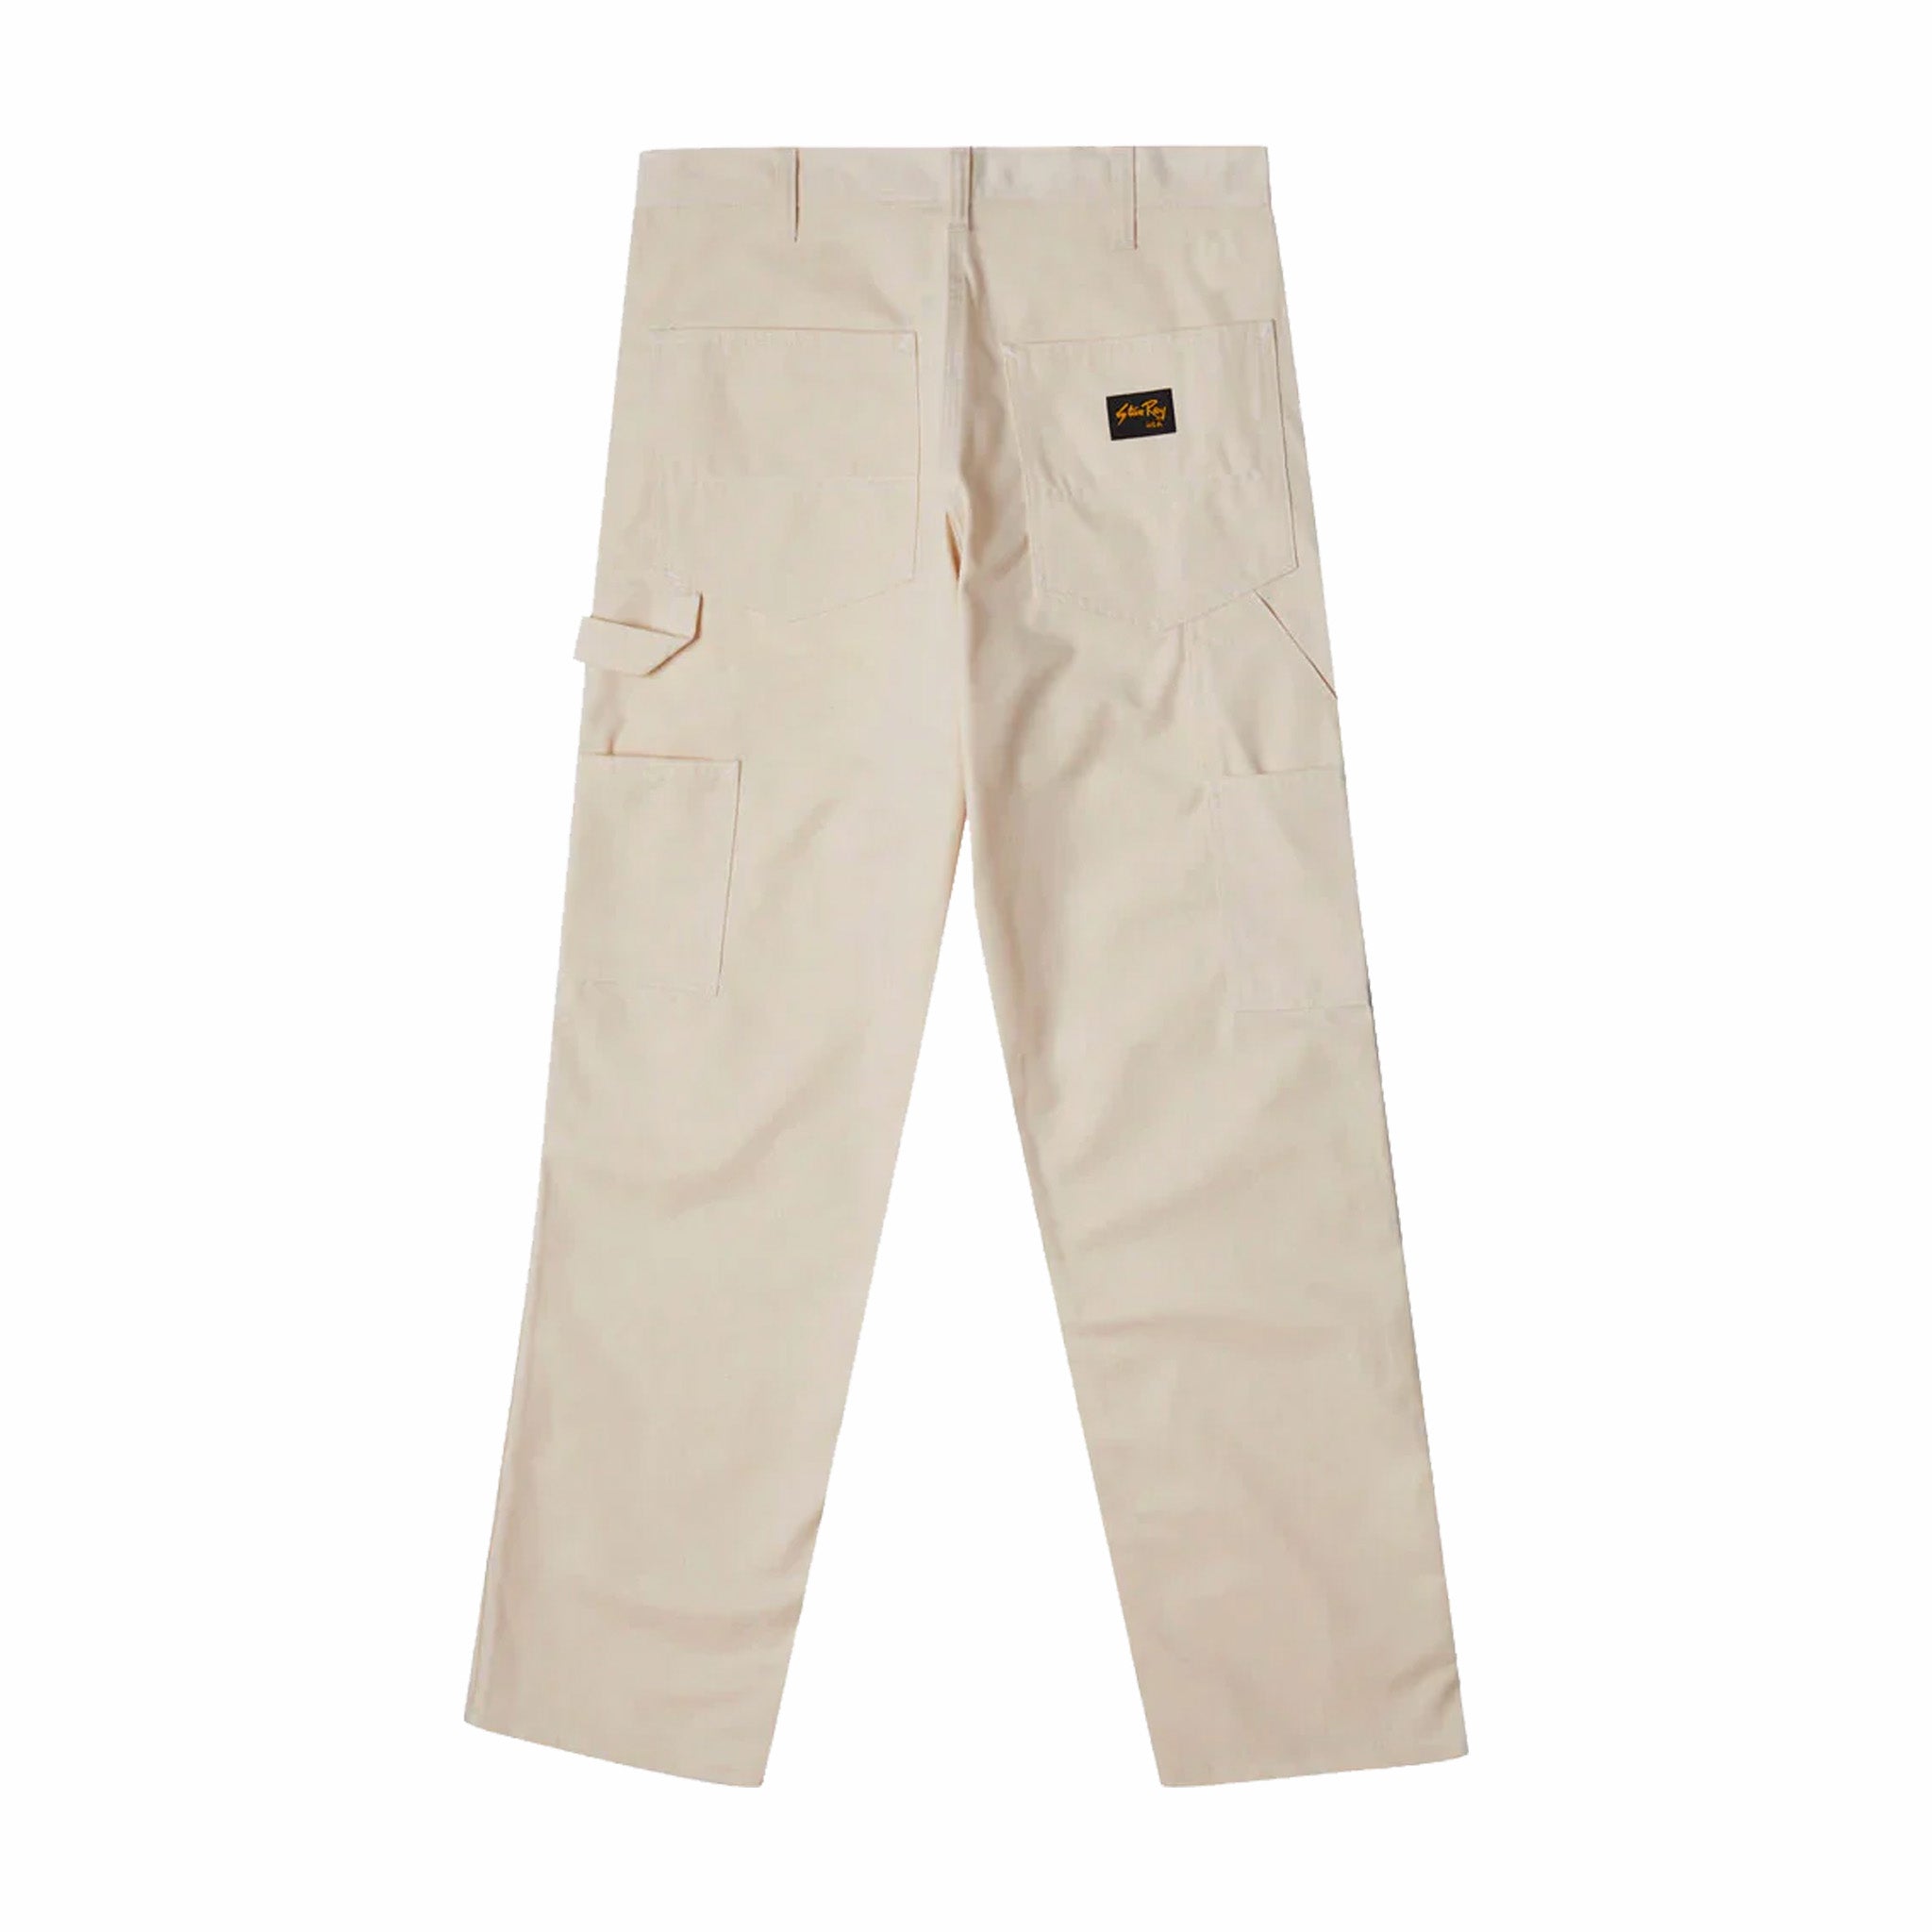 Stan Ray Original Painter Pant 1154 (Natural Drill) - August Shop